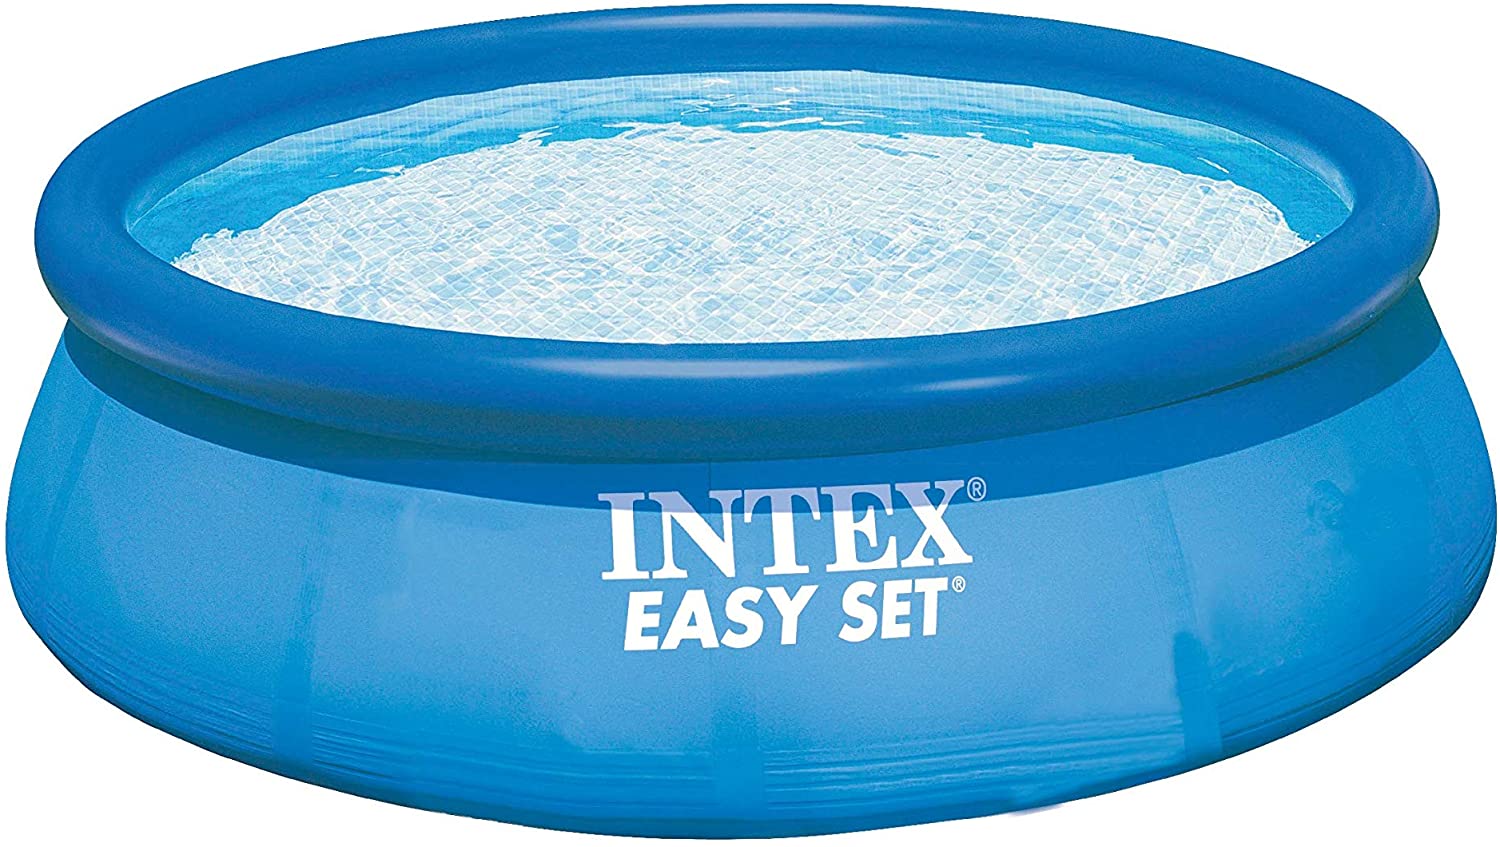 Swimming Pool- Easy Set, 8ft.x30in. - image 1 of 3